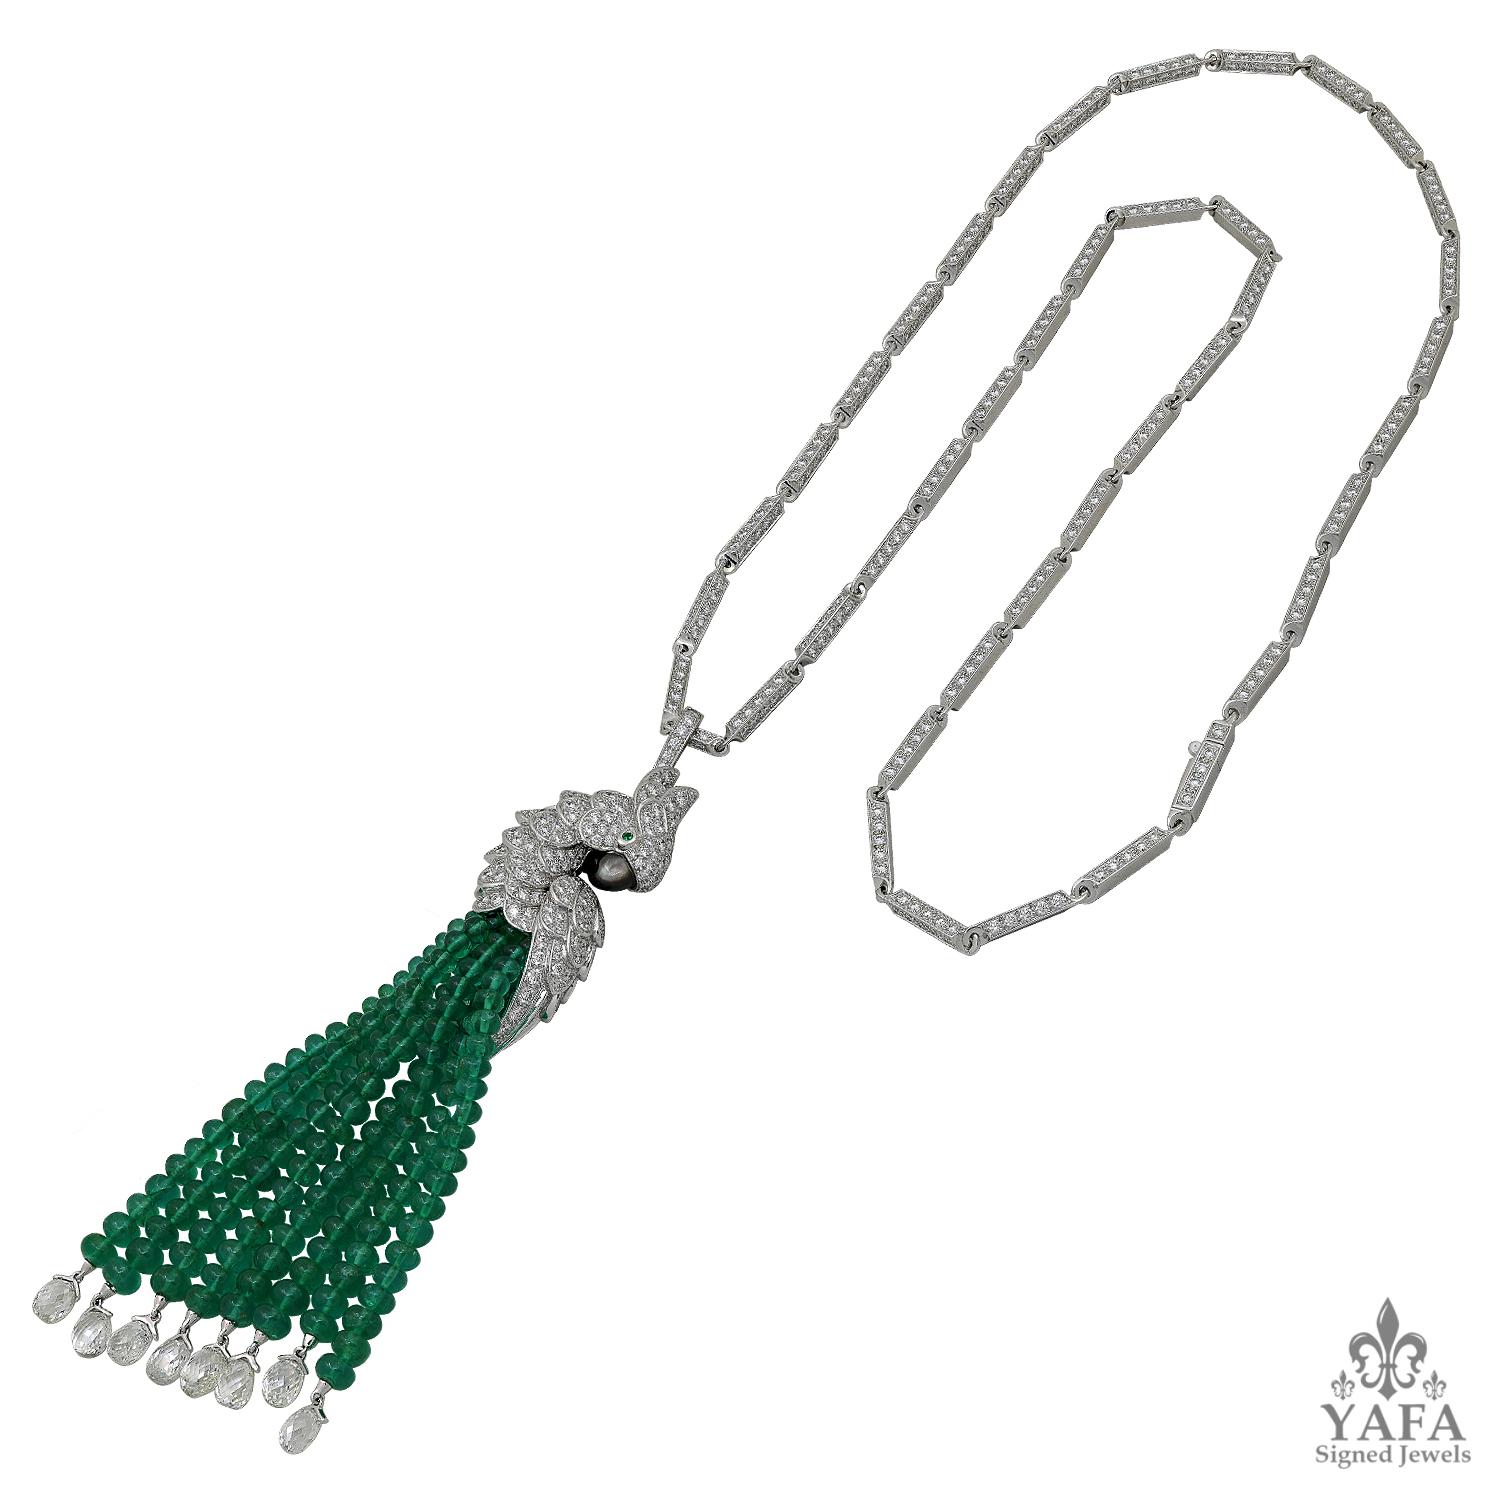 CARTIER “Les Oiseaux Liberes” Pendant Necklace
Designed as a parrot set with brilliant-cut diamonds, highlighted with emerald eyes and mother-of-pearl beak, suspending a tassel of emerald beads with diamond briolette terminals, to the brilliant-cut